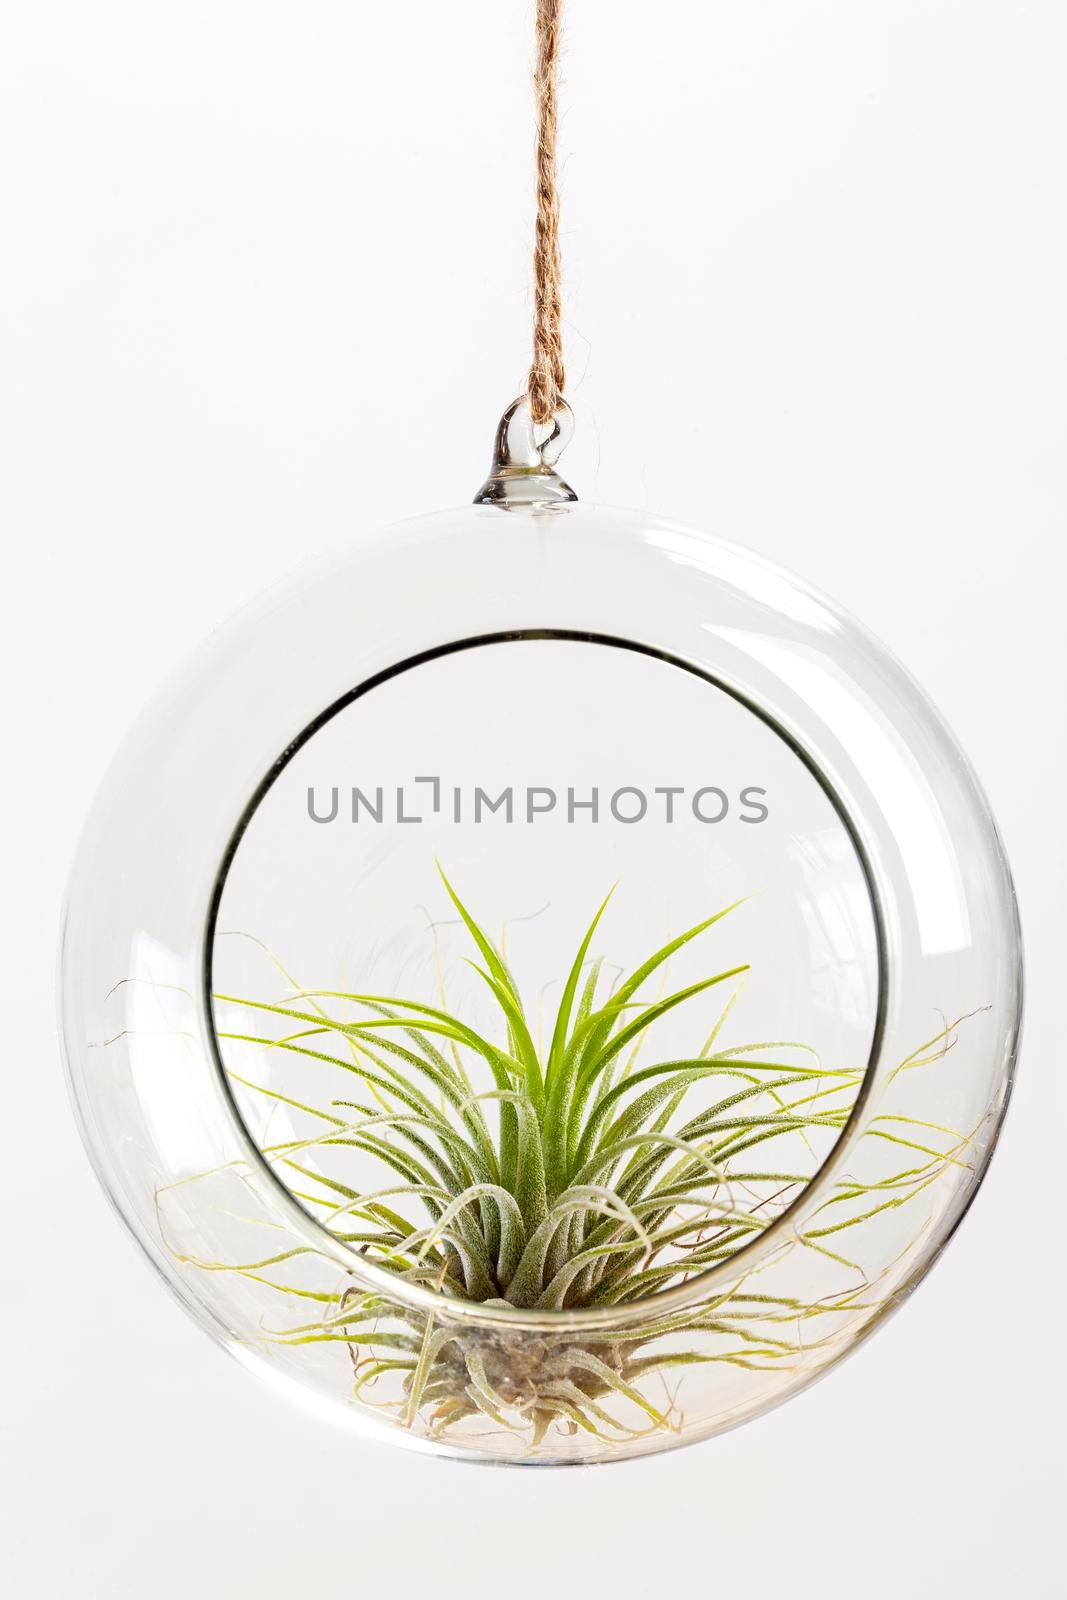 Green Tilandsia ionantha Airplant suspended in glass terrarium on white background by igor_stramyk